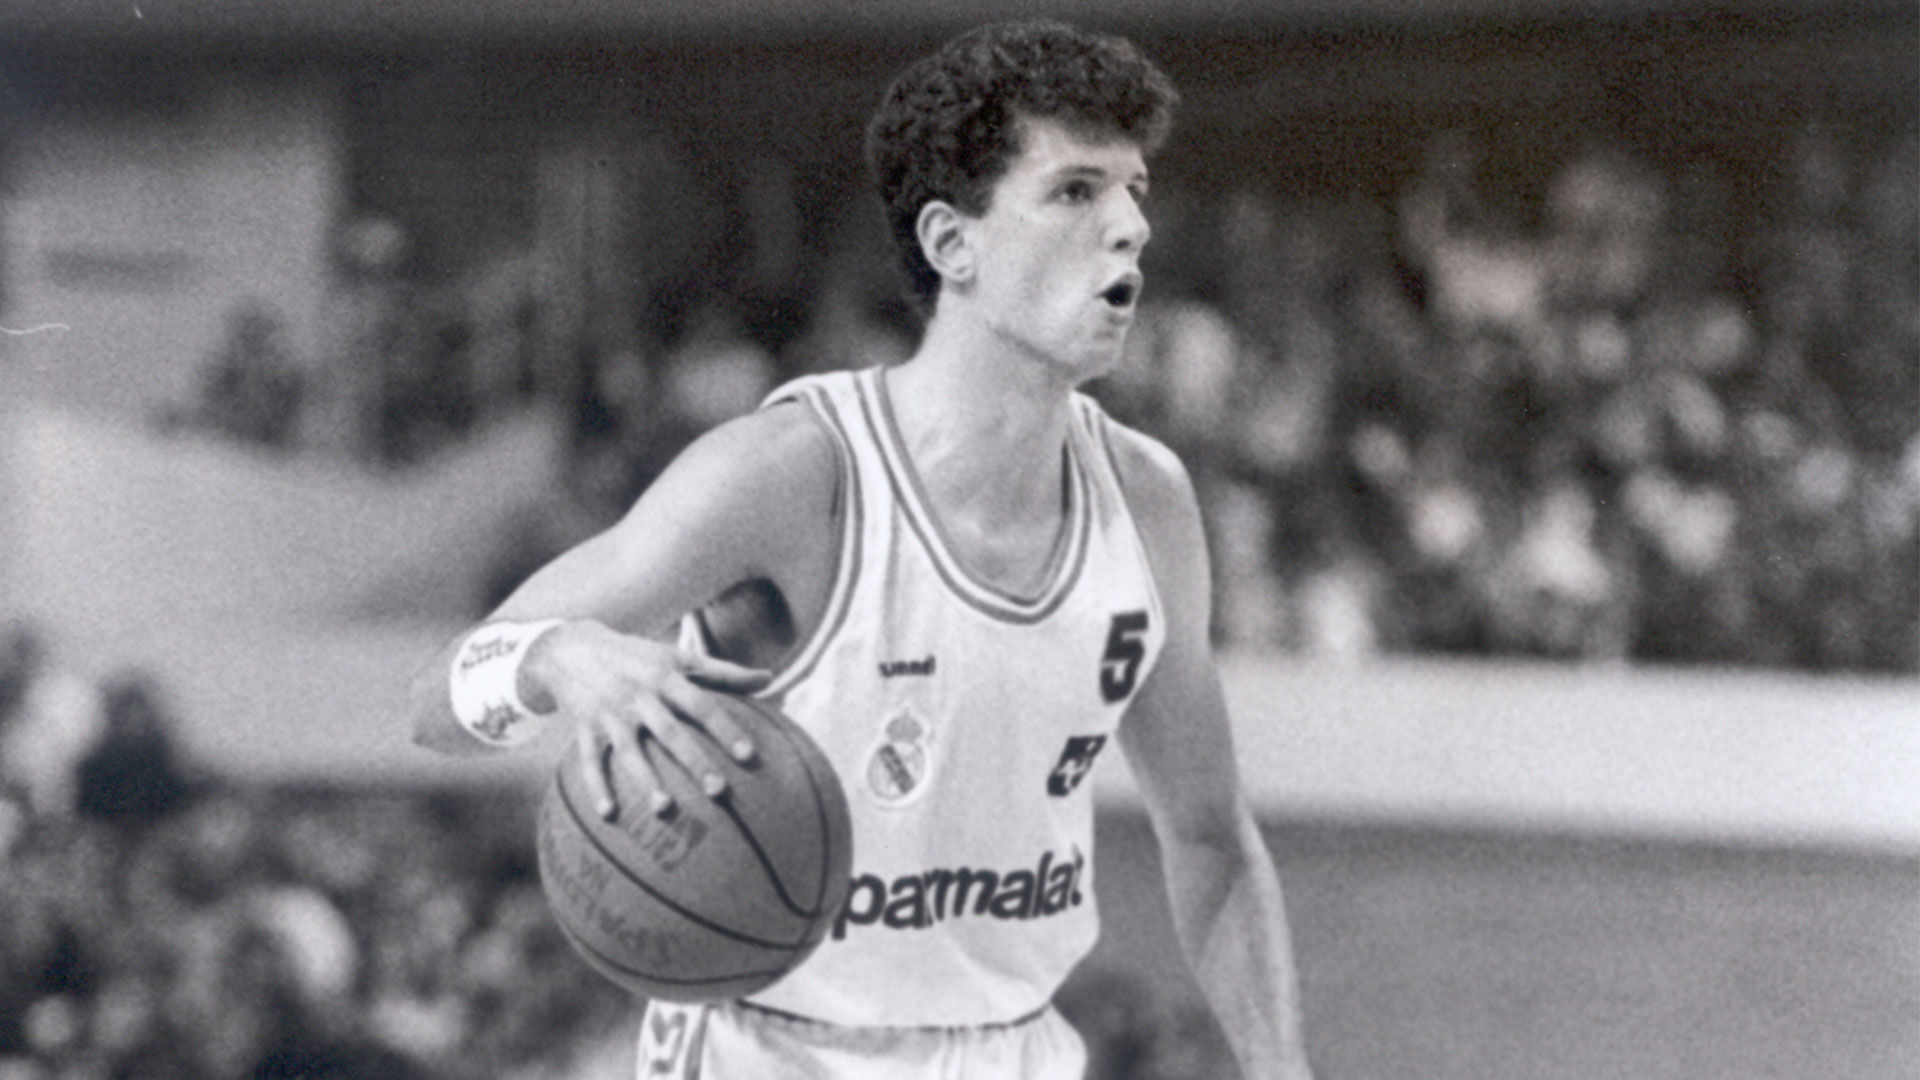 31 years since Petrovic left us